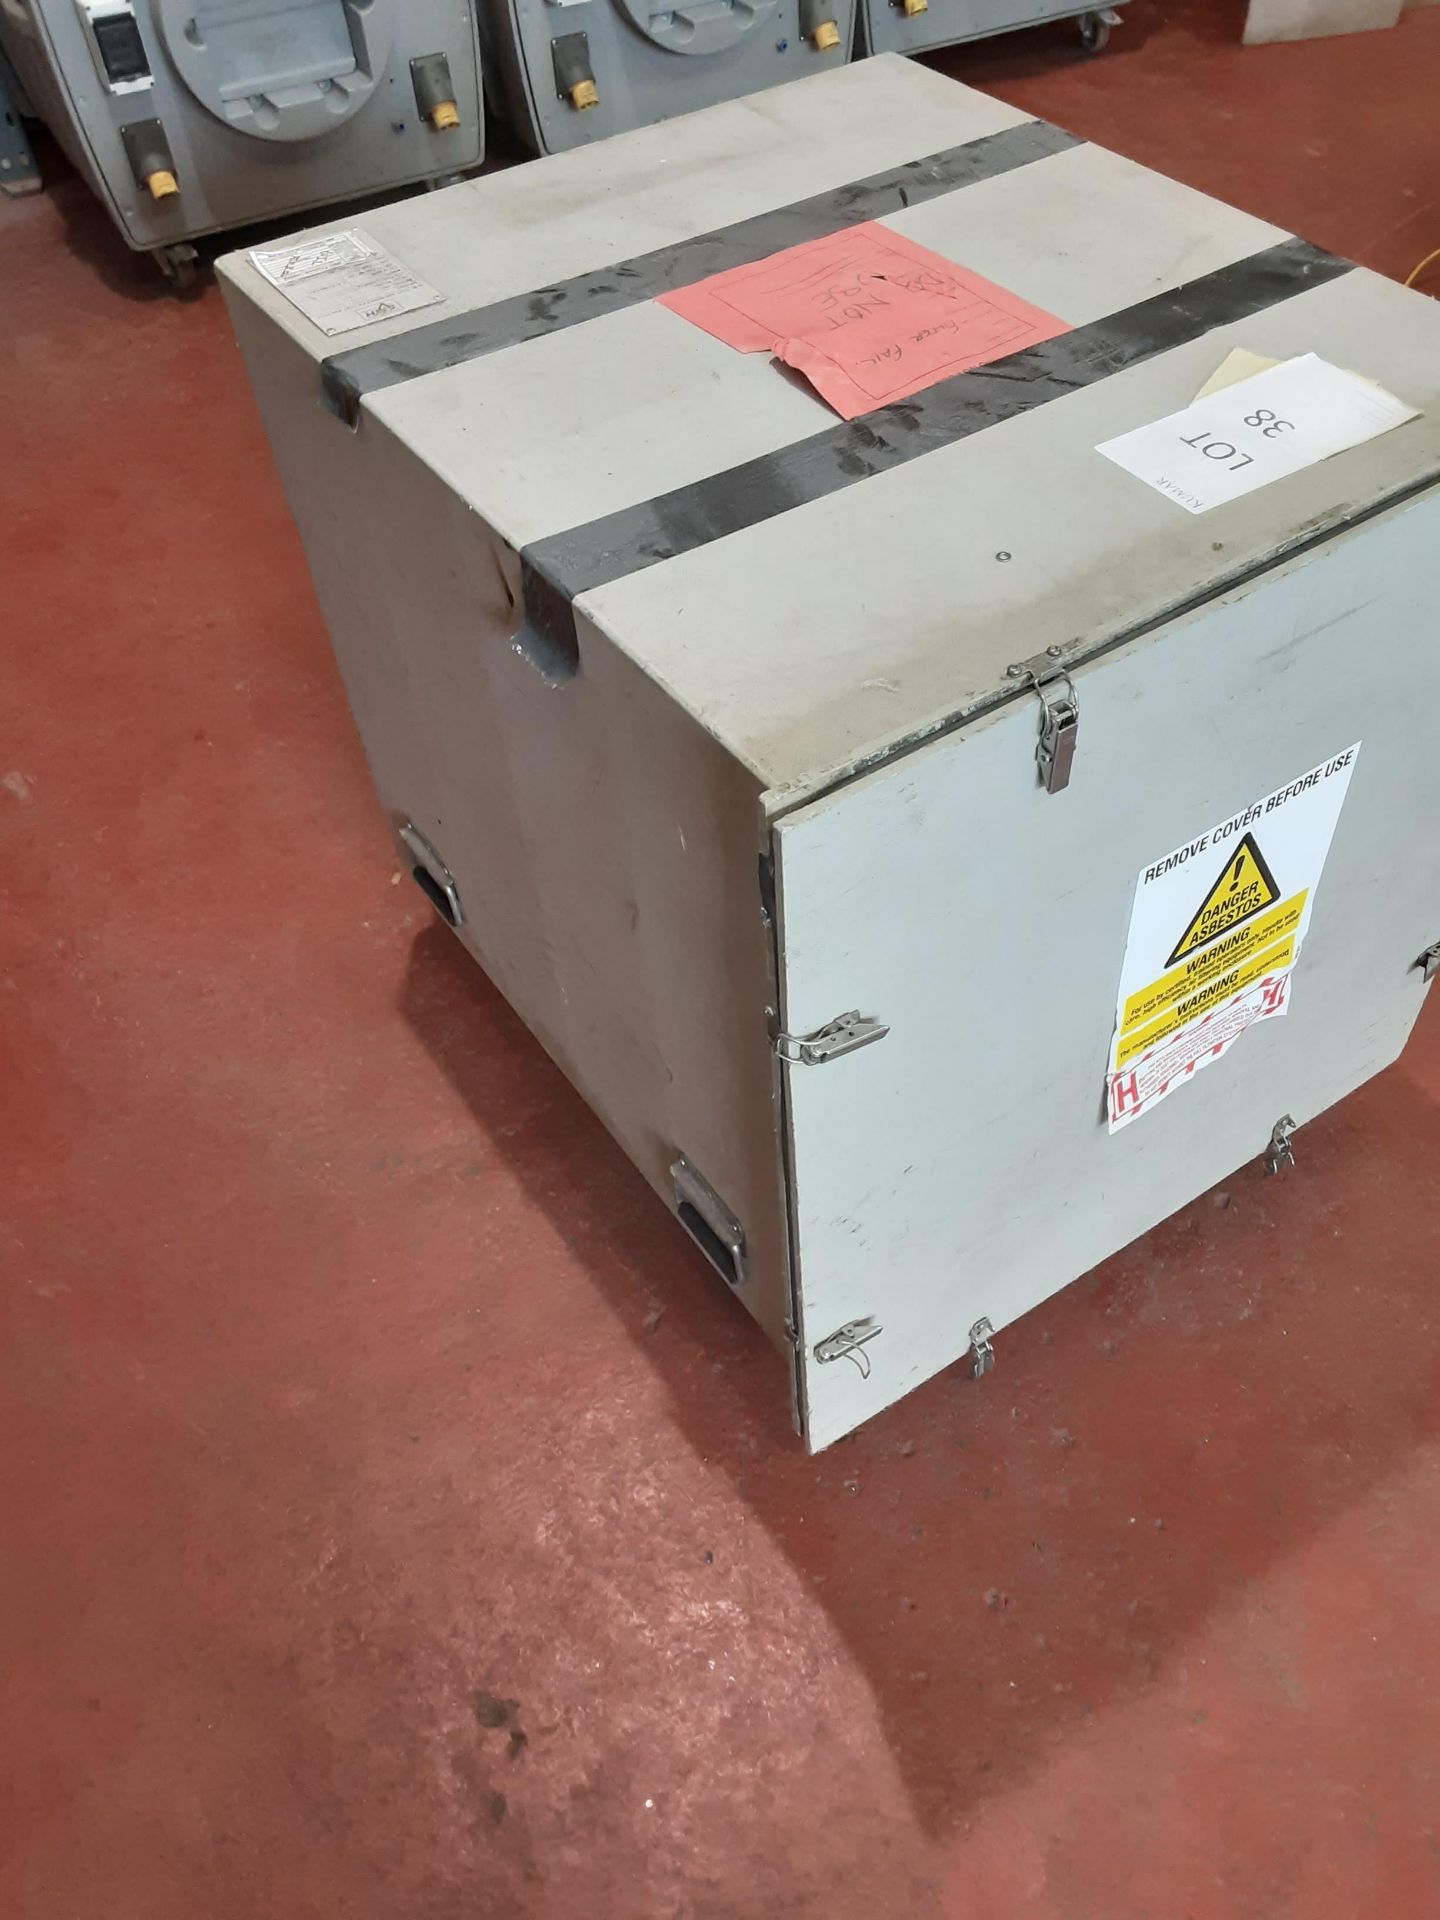 SMH NPU 4000 Extractor/Filter Unit 110V, Serial No. 6477 (2011) Marked as Faulty (Spares or - Image 4 of 6